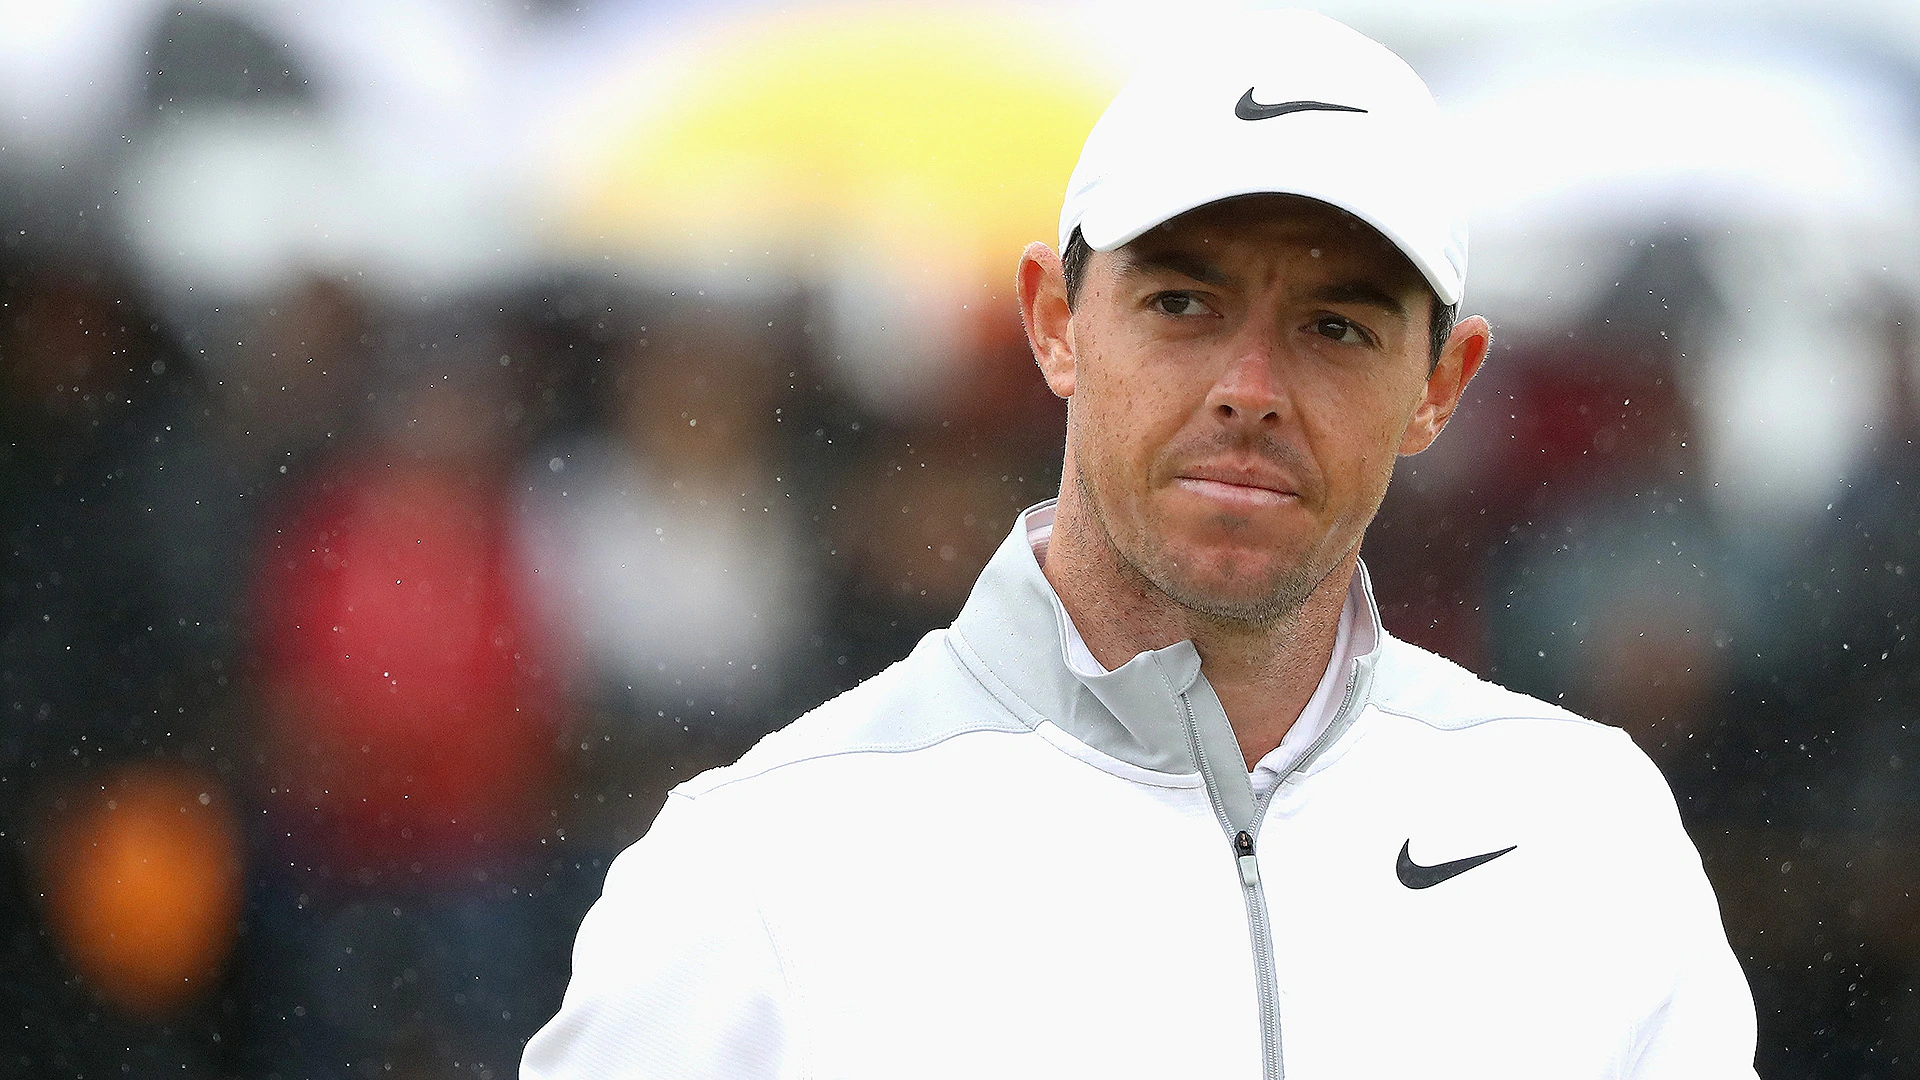 McIlroy skipping first FedExCup playoff event